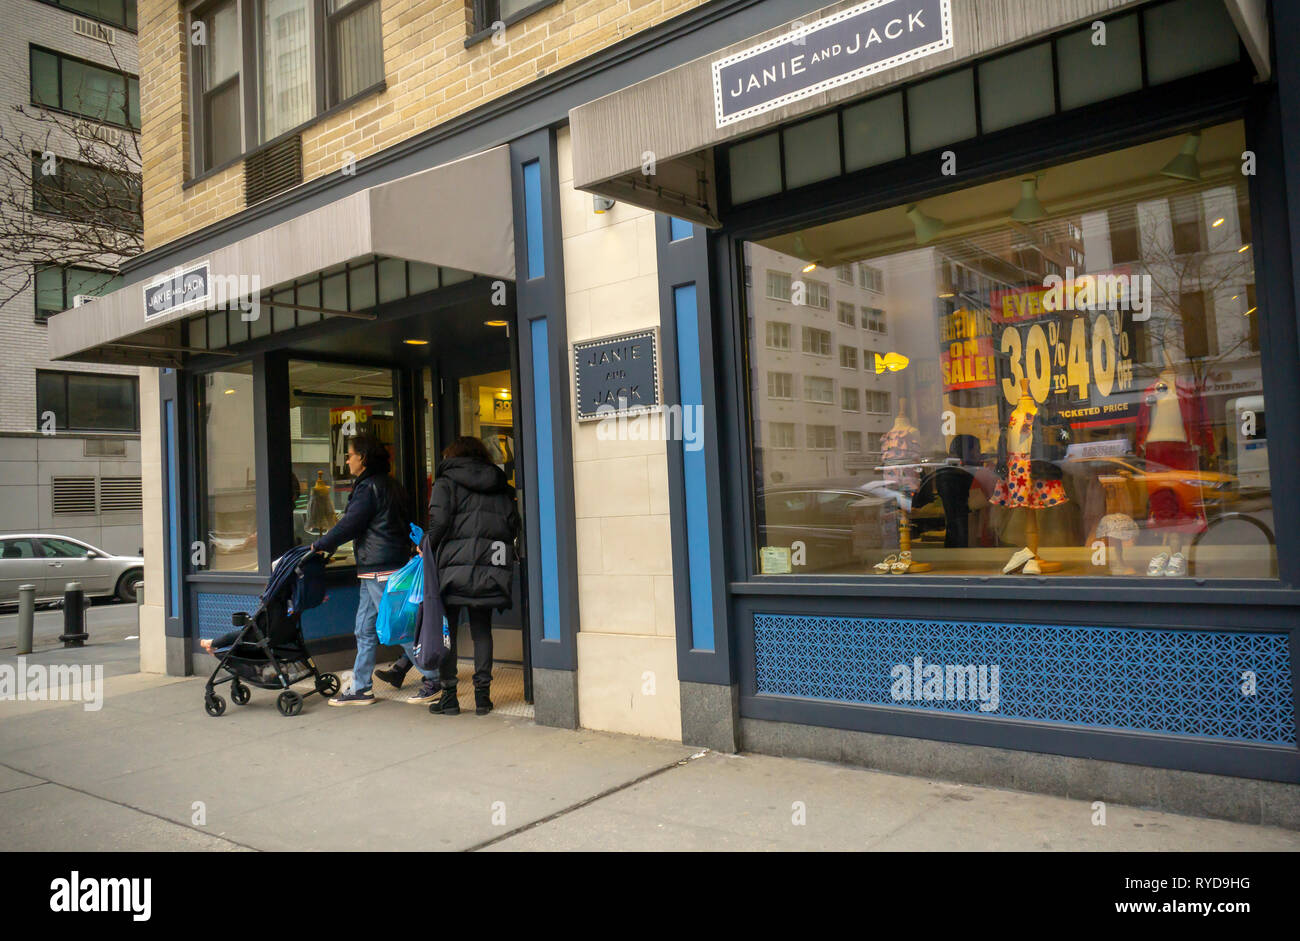 Customers at the Janie and Jack store in the Upper East Side neighborhood of New York on Sunday, March 3, 2019. Gap Inc. is buying the Janie and Jack children's fashion business, including store leases and e-commerce for $25 million form the bankrupt Gymboree. (Â© Richard B. Levine) Stock Photo